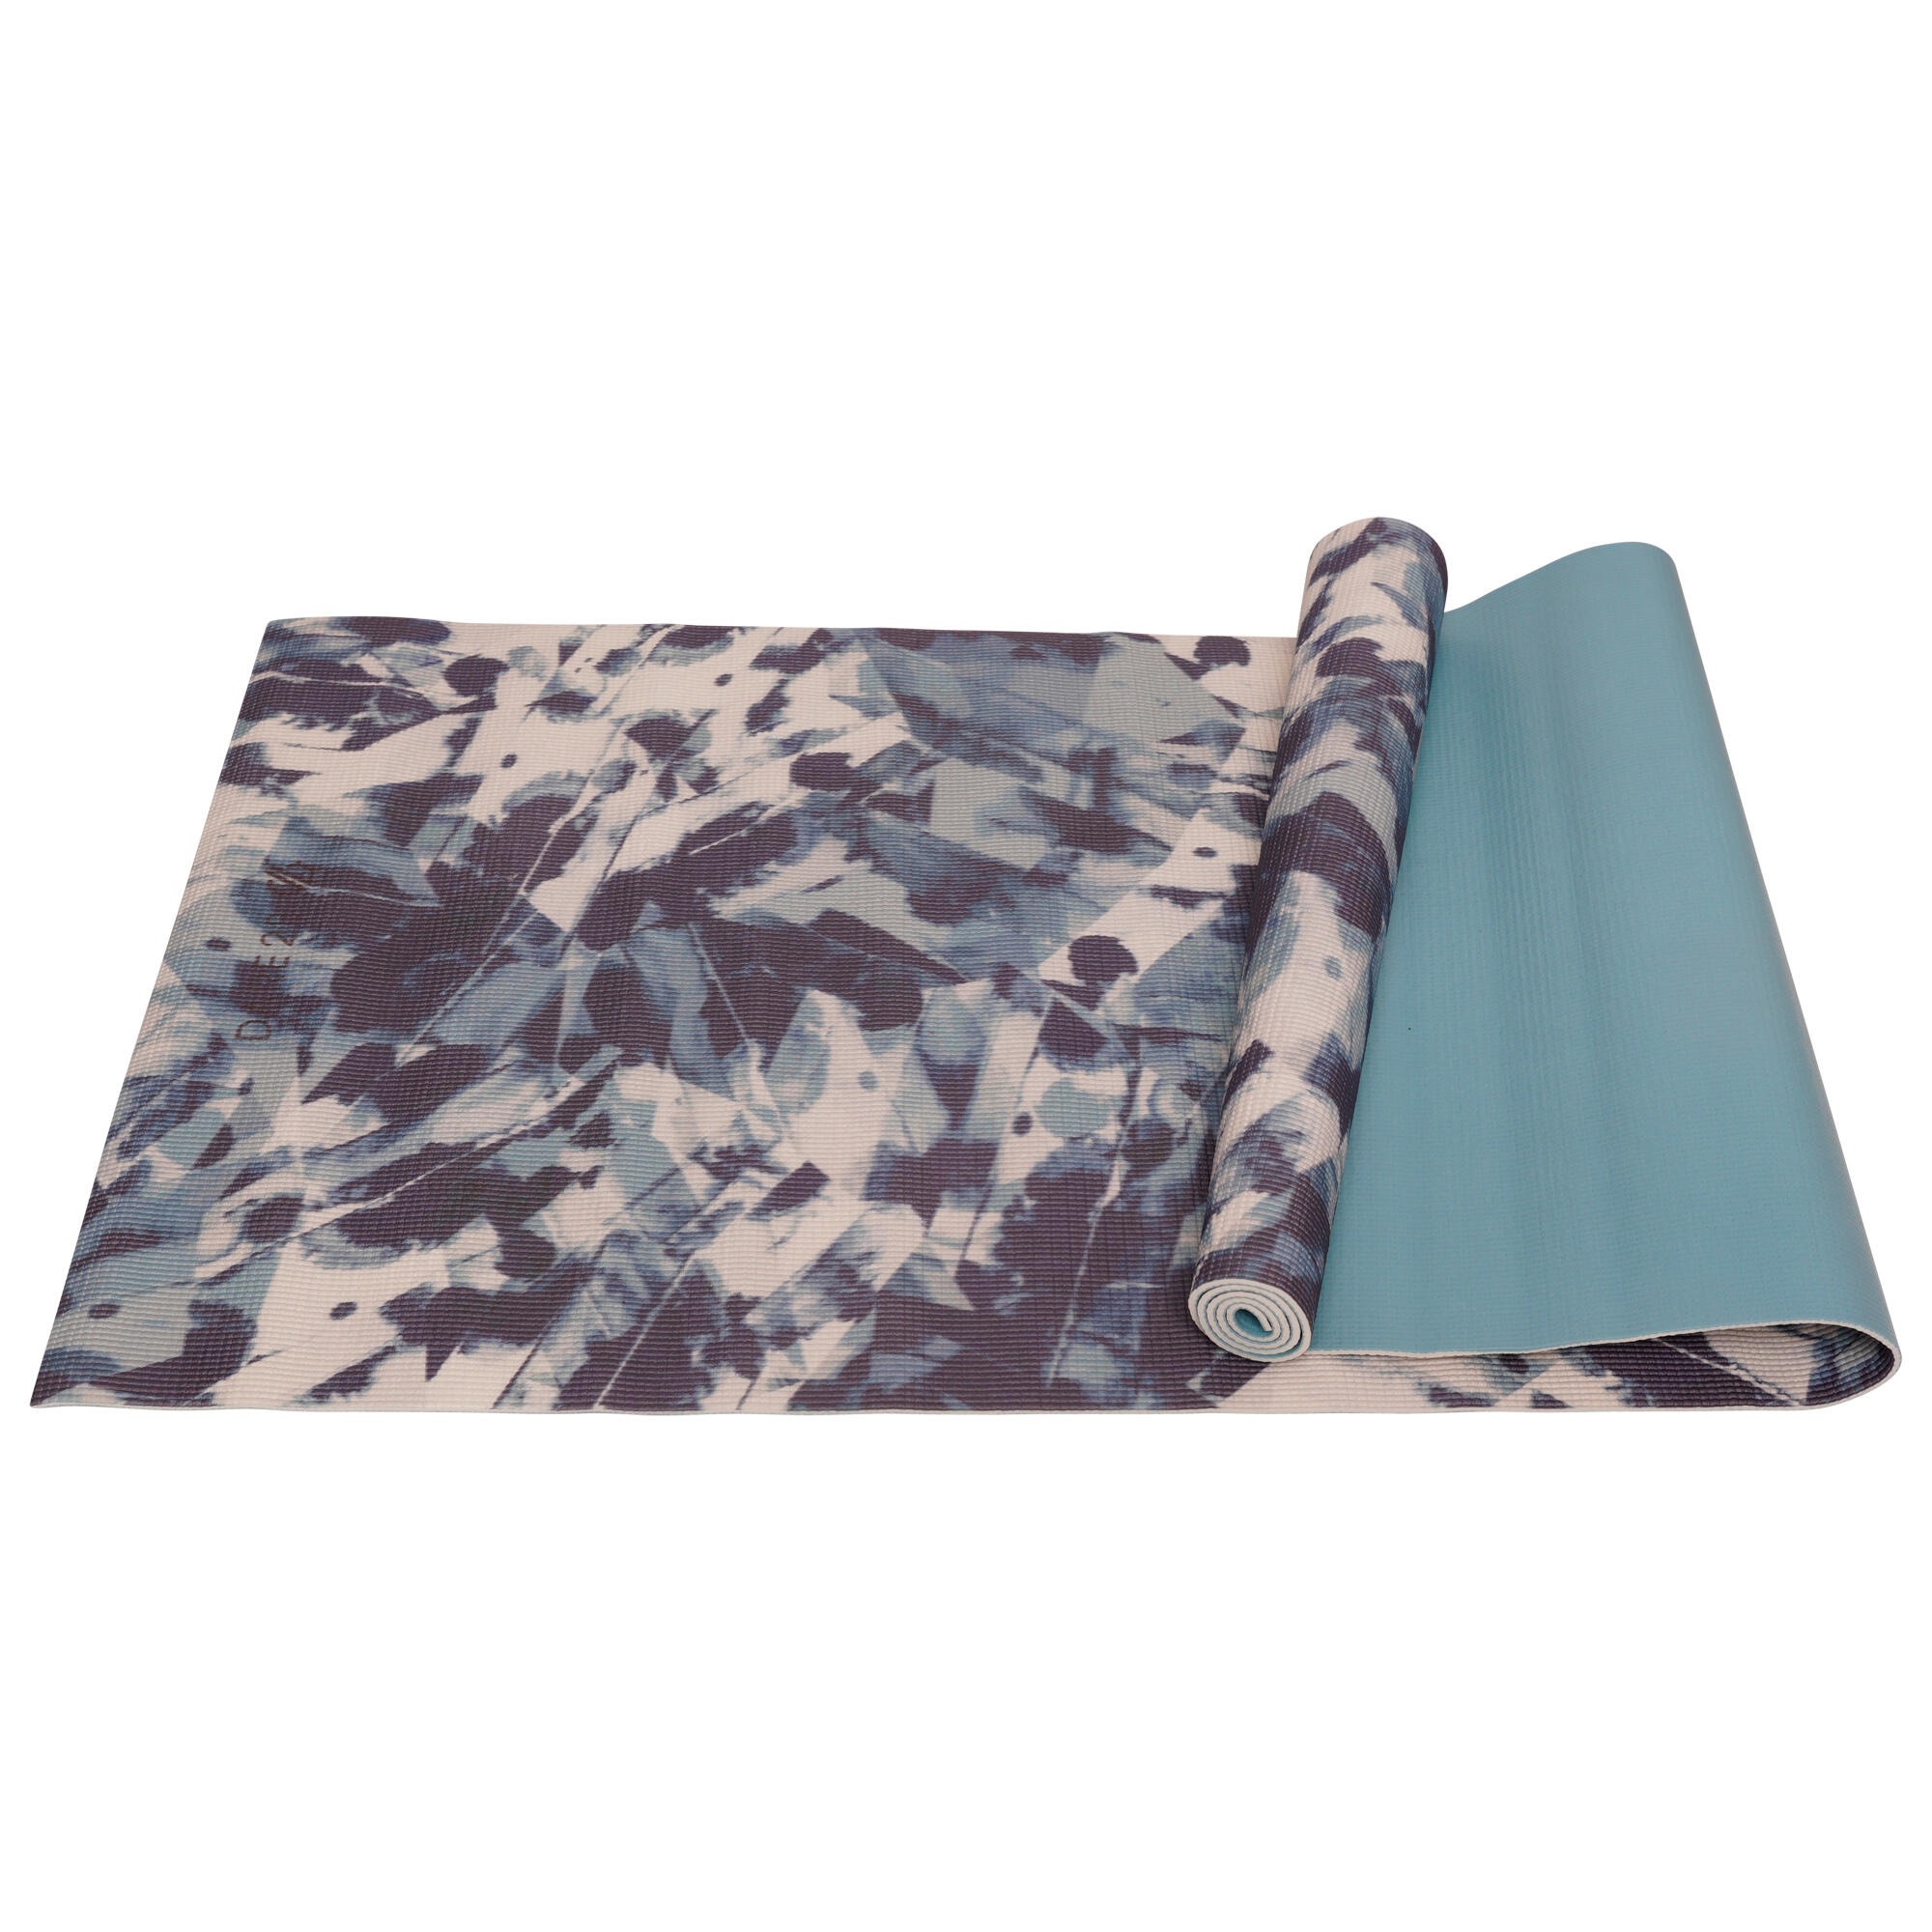 Adults' Home Fitness Yoga Mat - Pale Green 2/3